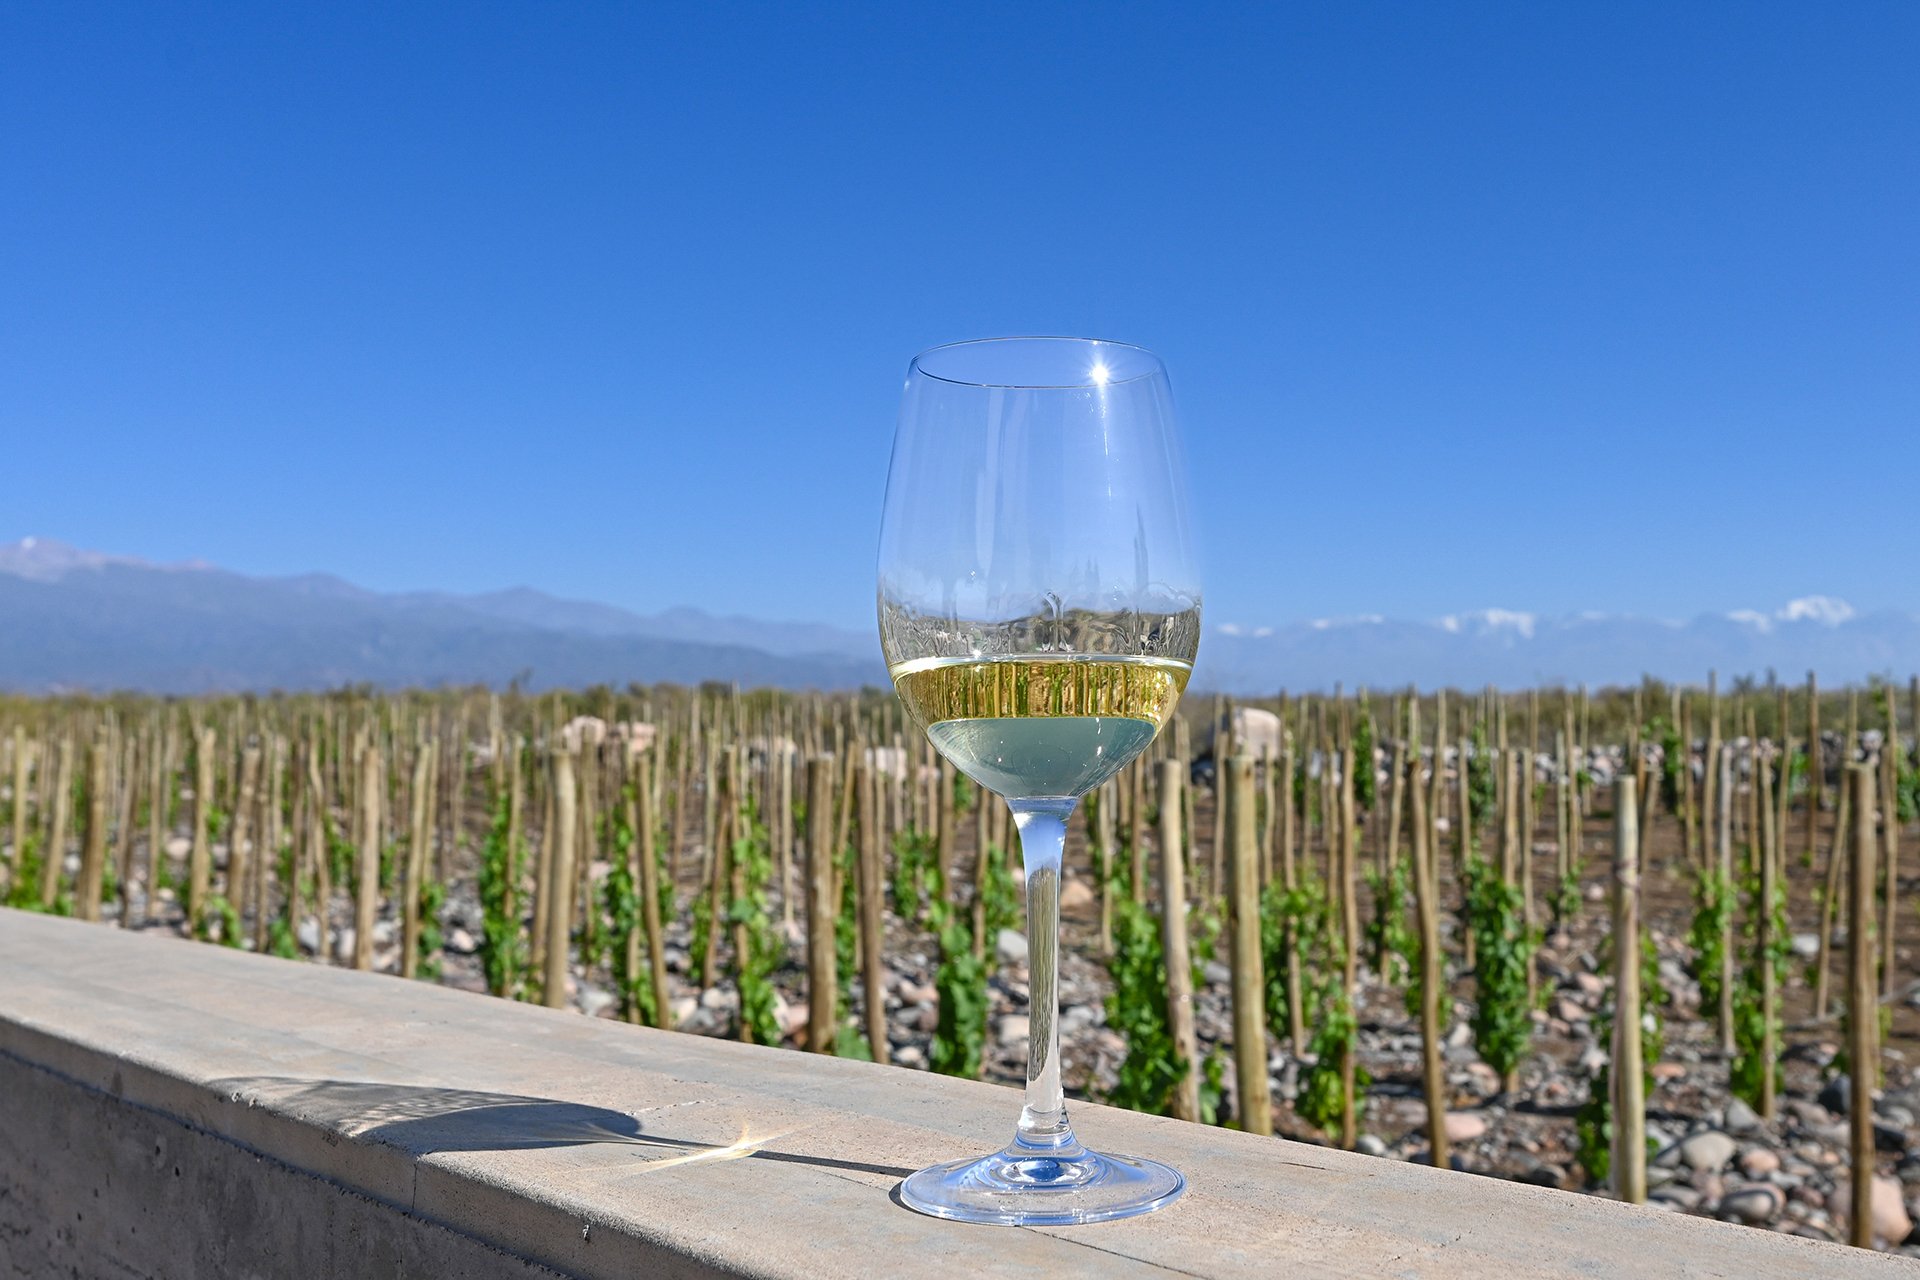 Mendoza is the largest wine-producing area in Argentina.